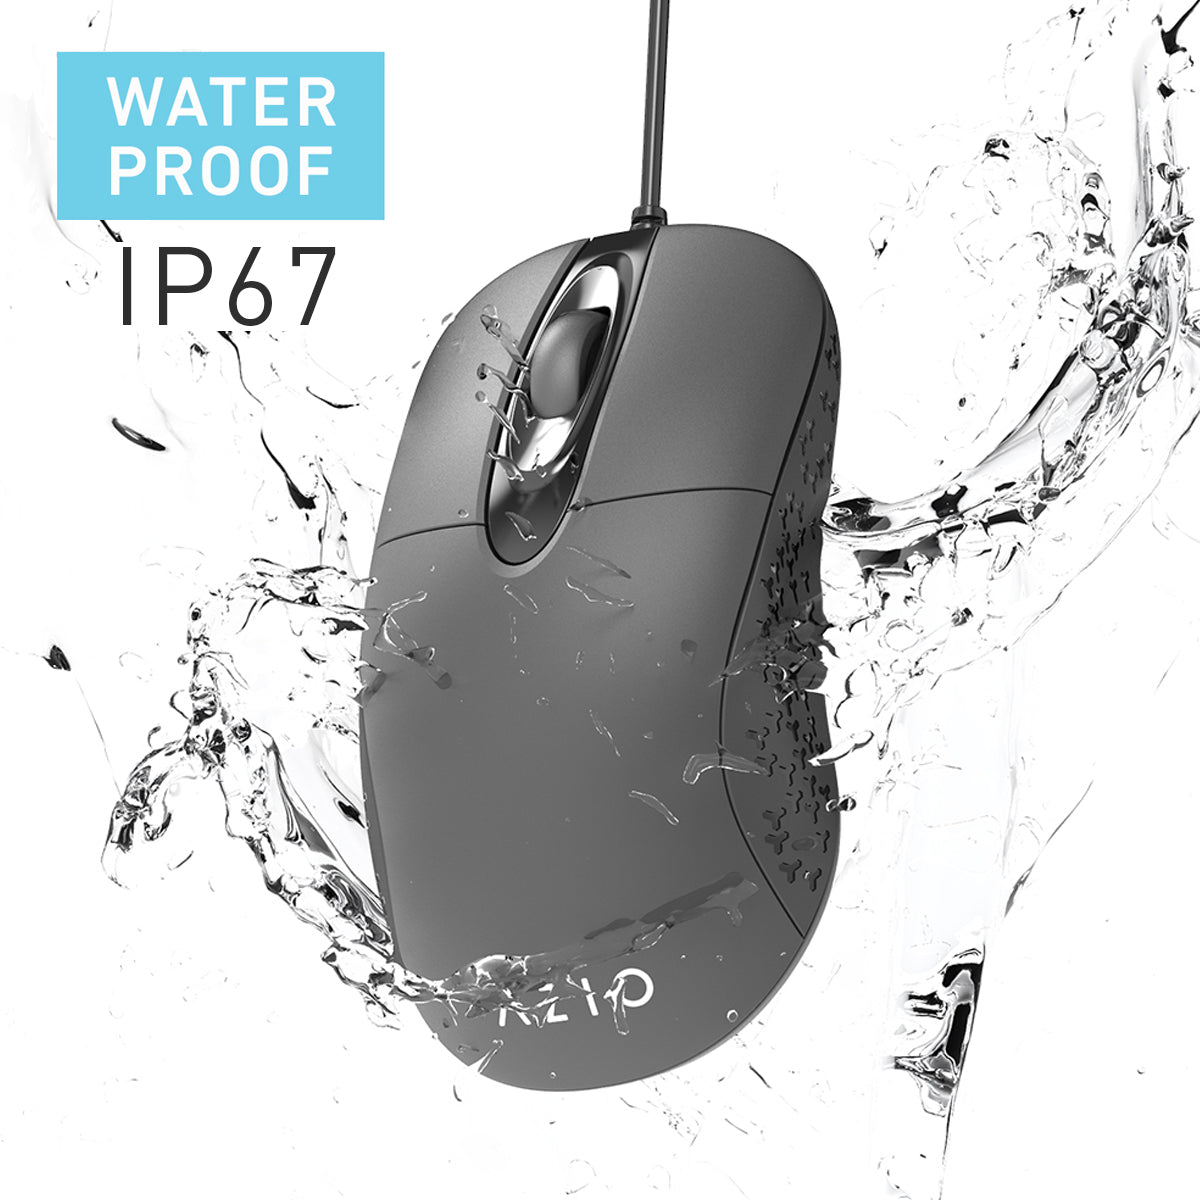 MMS206 Waterproof Optical Mouse